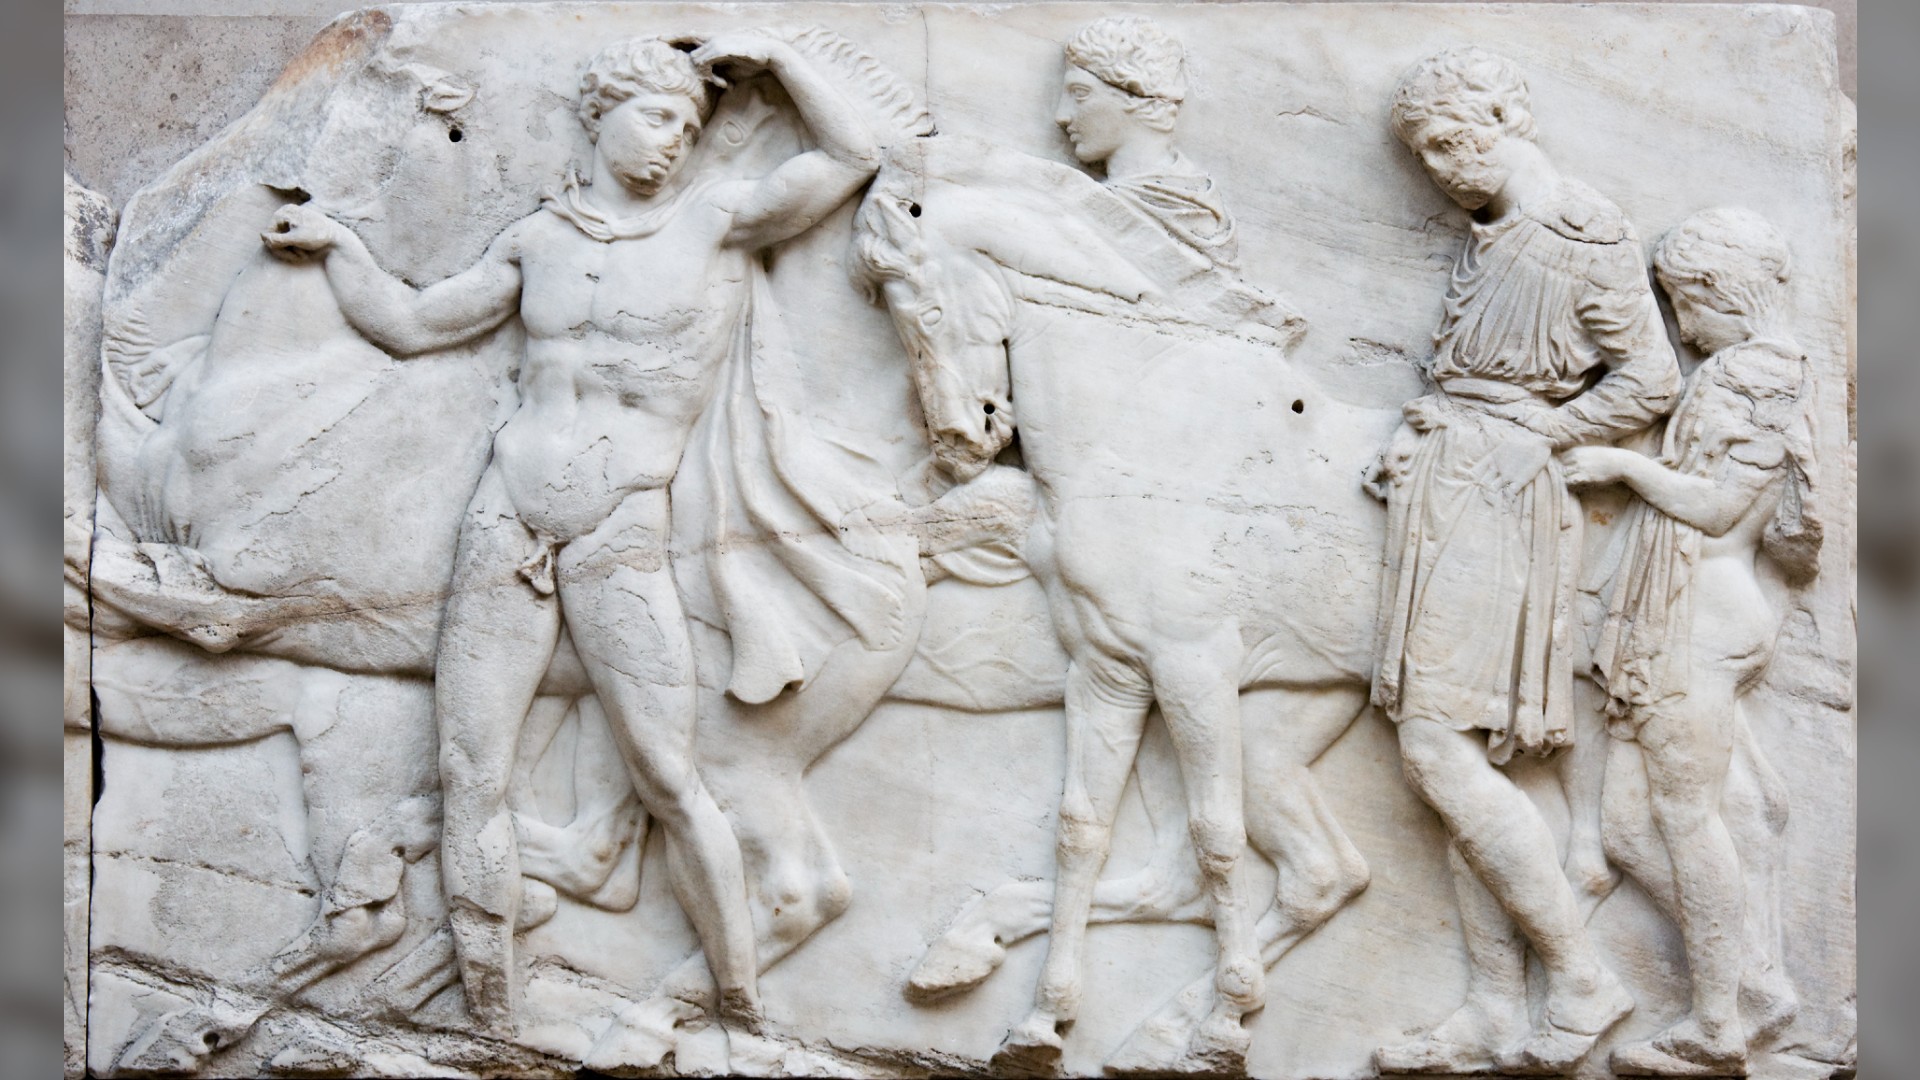 The Elgin Marbles stolen from Greece. From left to right we see a horse, a namke Greek man leading the way, whilst looking back at the others. Then there's another horse. Next to the horse is a person, and behind the horse if a person clothed in a tunic and a child with cloth draped around their shoulders.